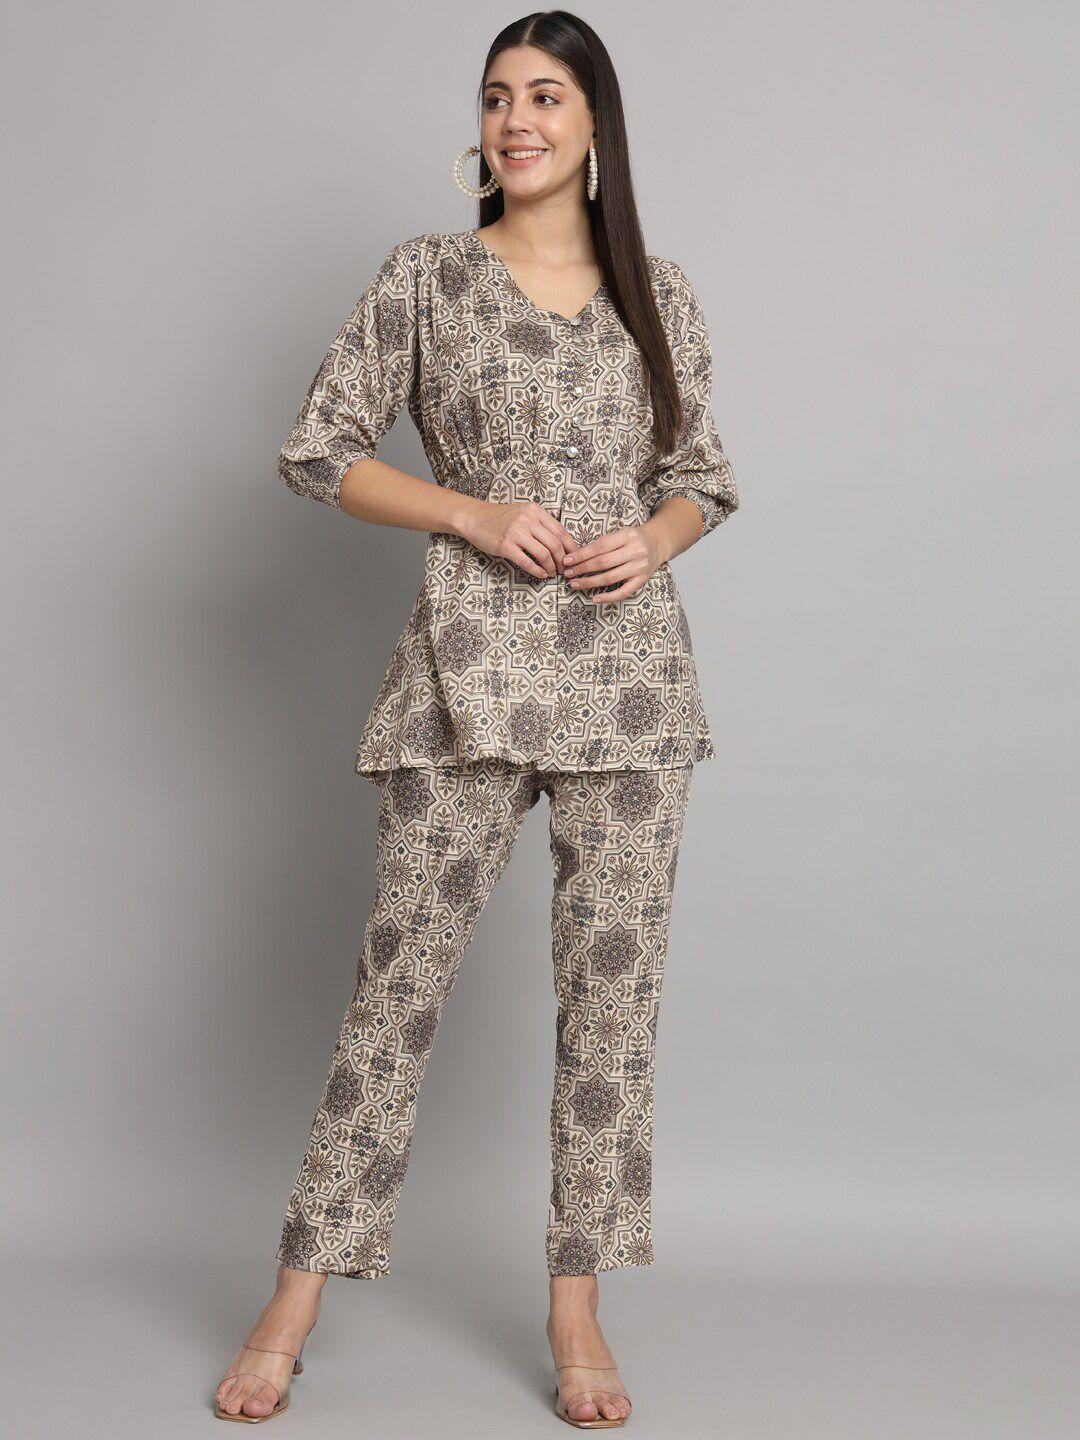 readiprint ethnic motif printed top with trousers